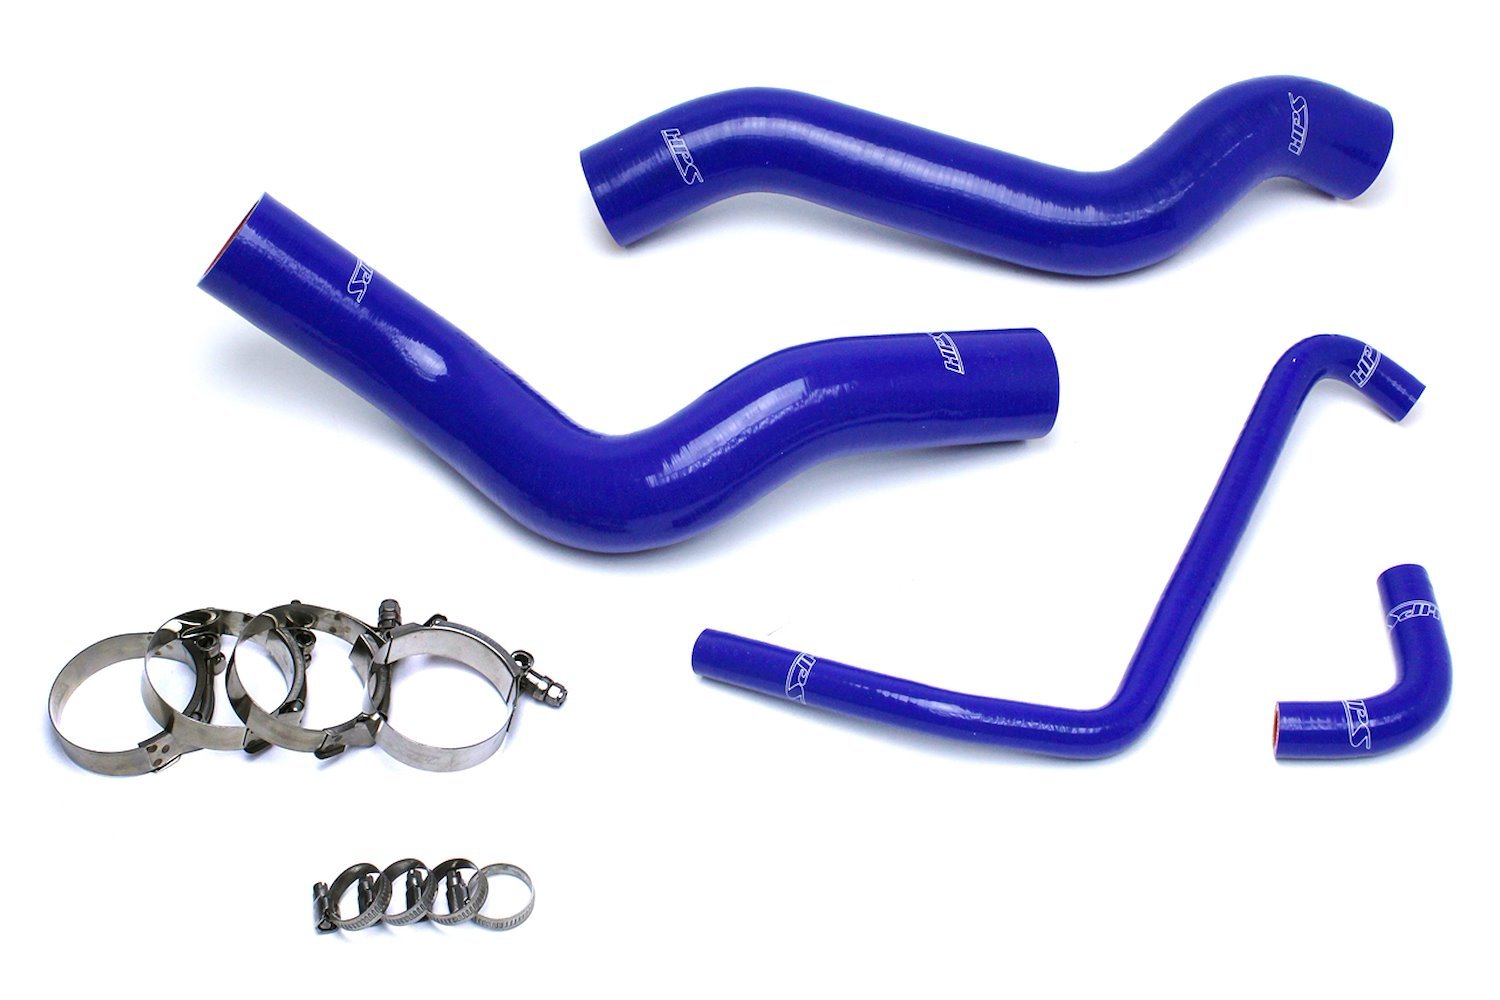 57-1503R-BLUE Radiator Hose Kit, High-Temp 3-Ply Reinforced Silicone, Replace OEM Rubber Radiator Coolant Hoses